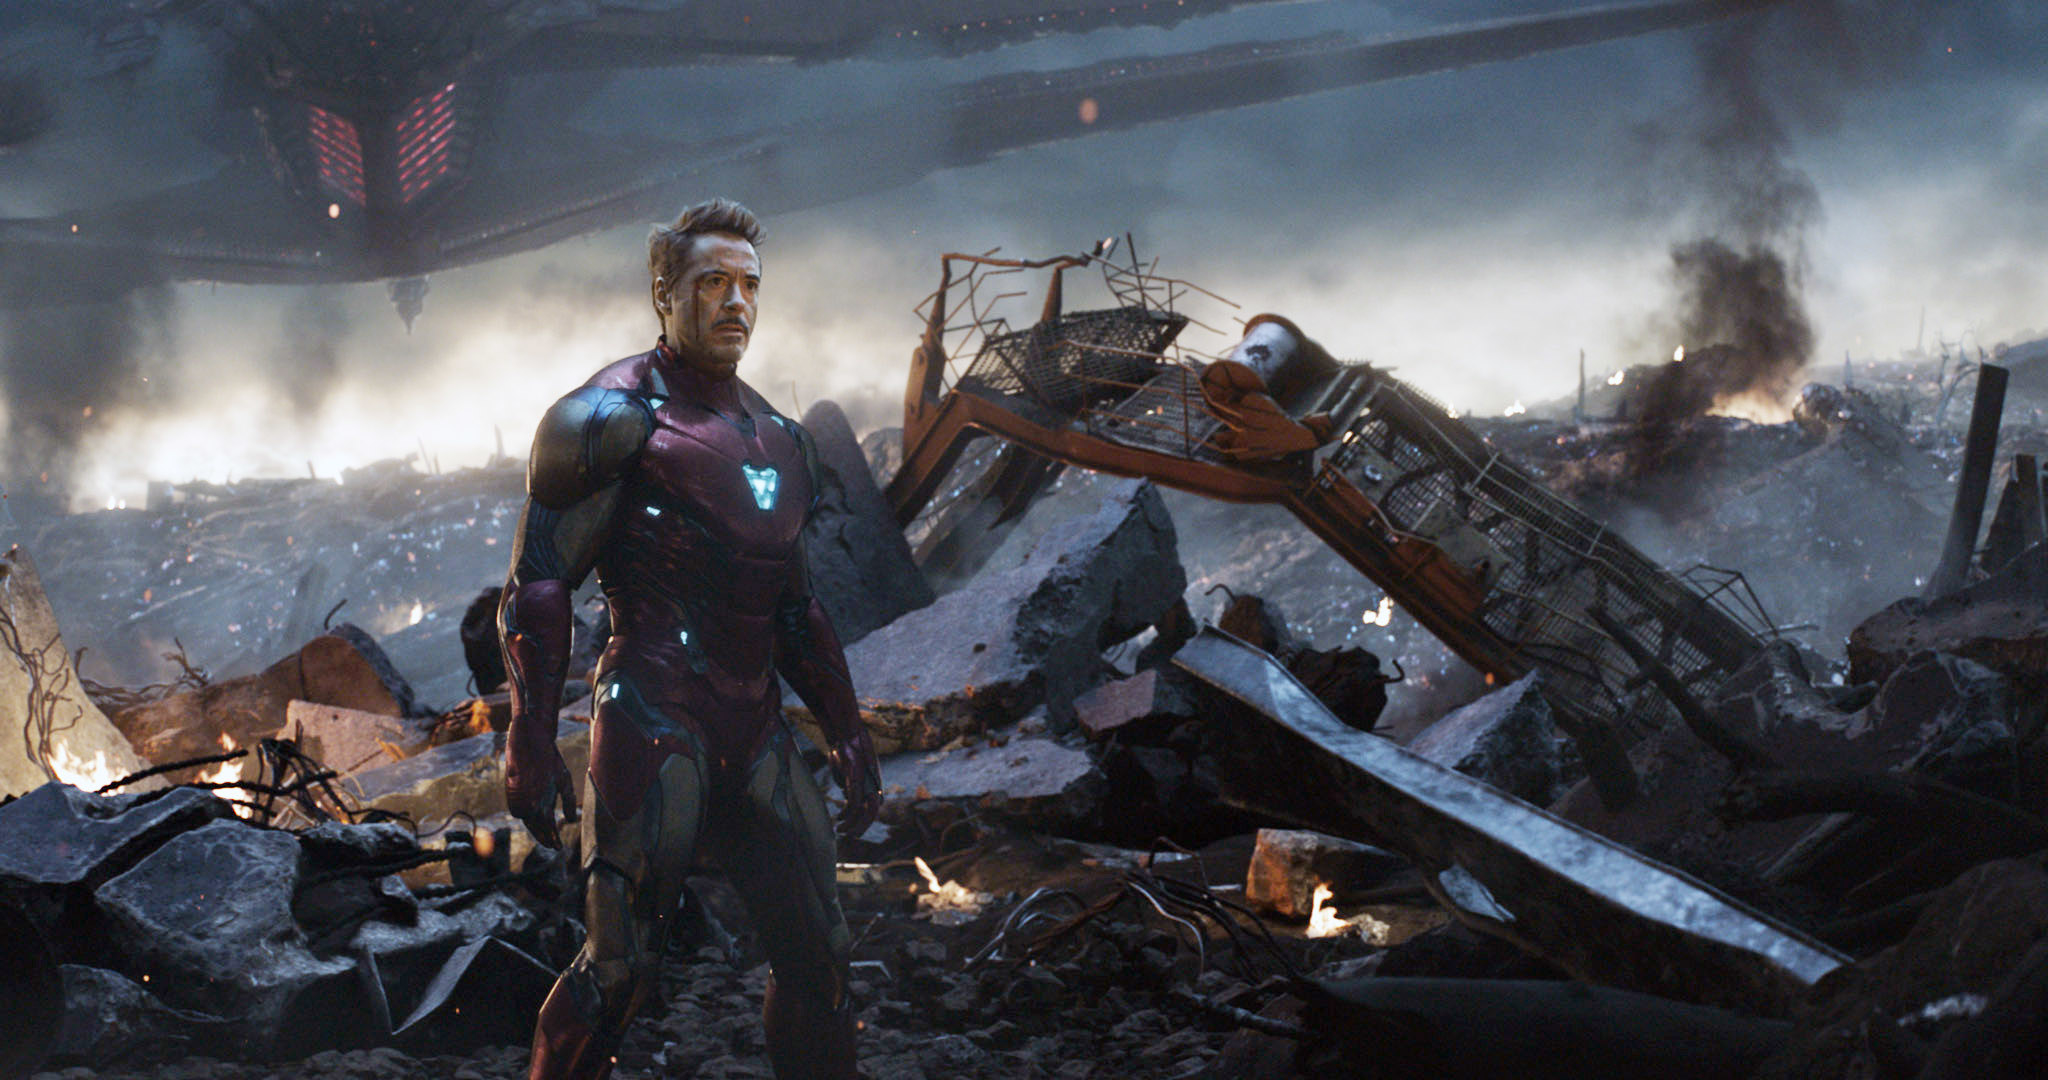 Tony on the battlefield in the Avengers